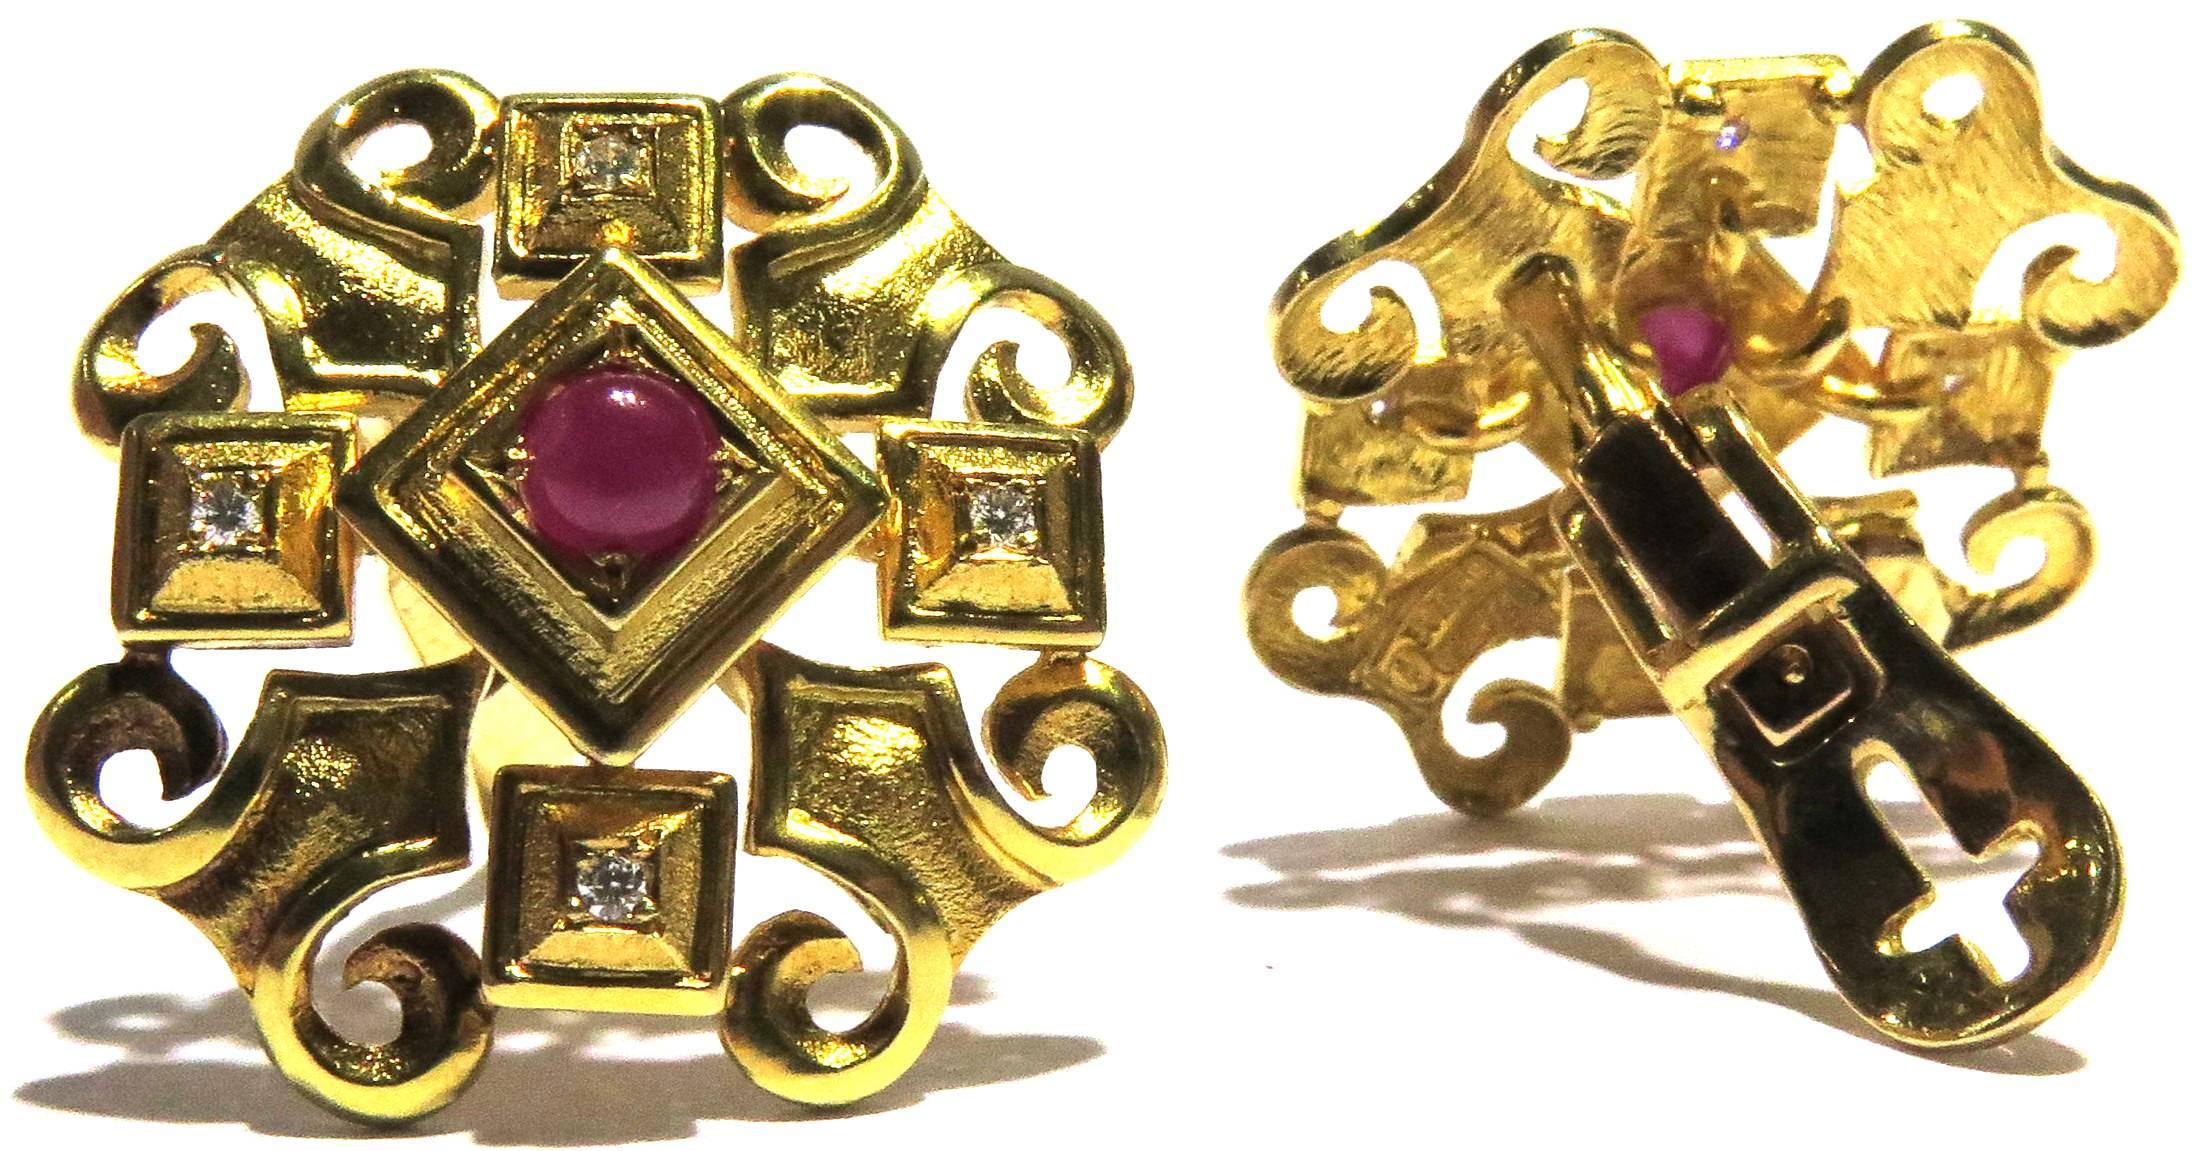 Theses gorgeous Ilias Lalaounis 18k earrings, besides being easy to wear if your ears are not pierced, can easily have a post added to make them pierced. The cabochon cut ruby centers exude a beautiful red color. These earrings are flattering on all